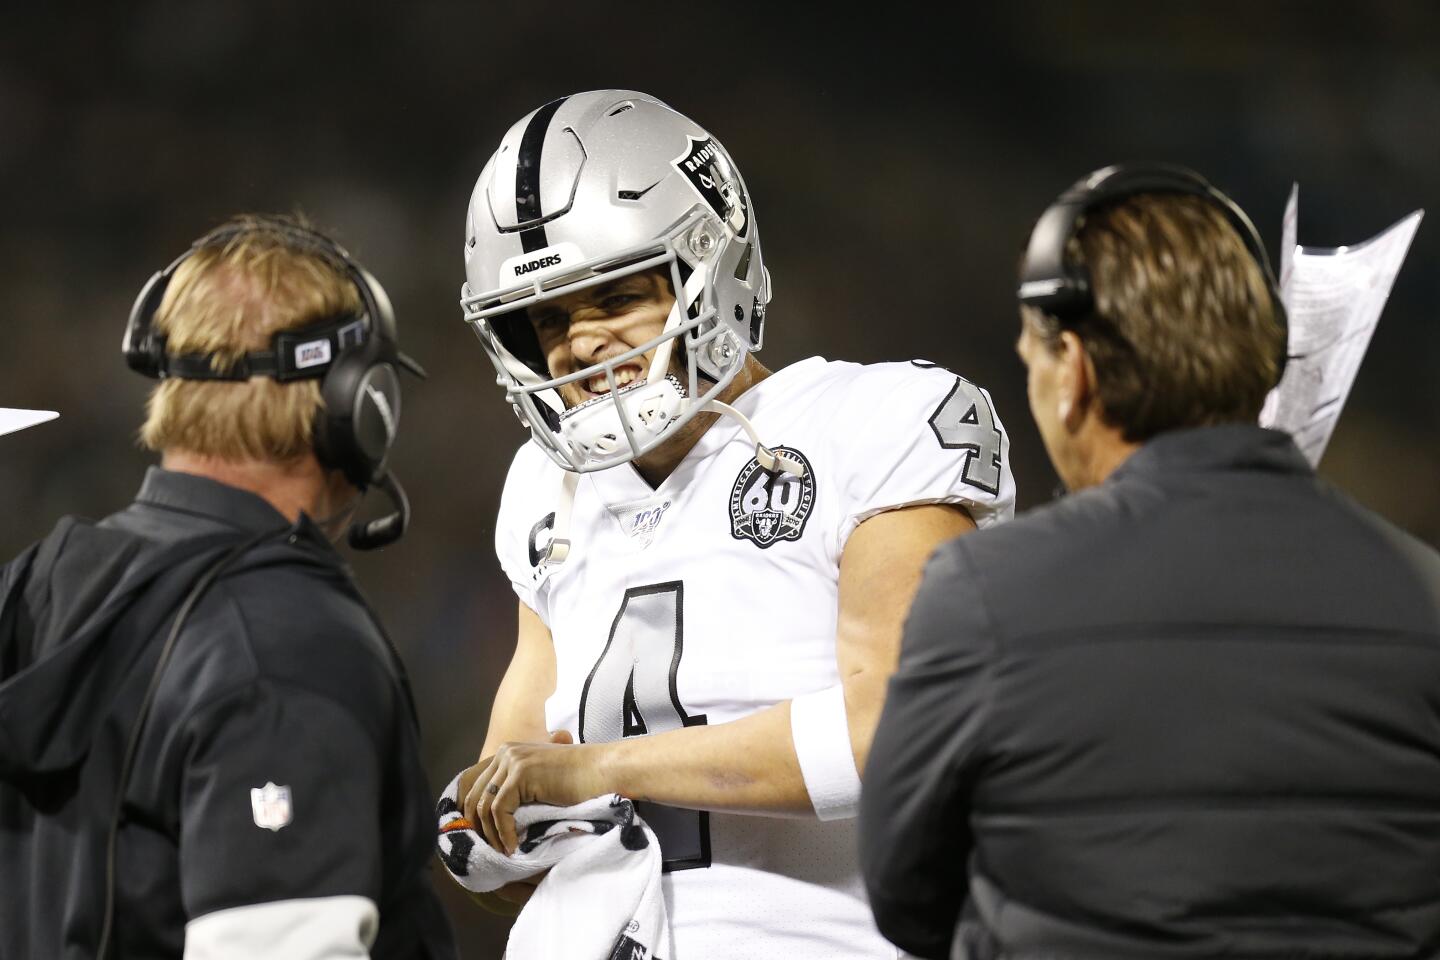 Raiders quarterback Derek Carr (4) talks with coach Jon Gruden, left, and offensive coordinator Greg Olson during the first half of a game against the Chargers on Nov. 7 at RingCentral Coliseum.